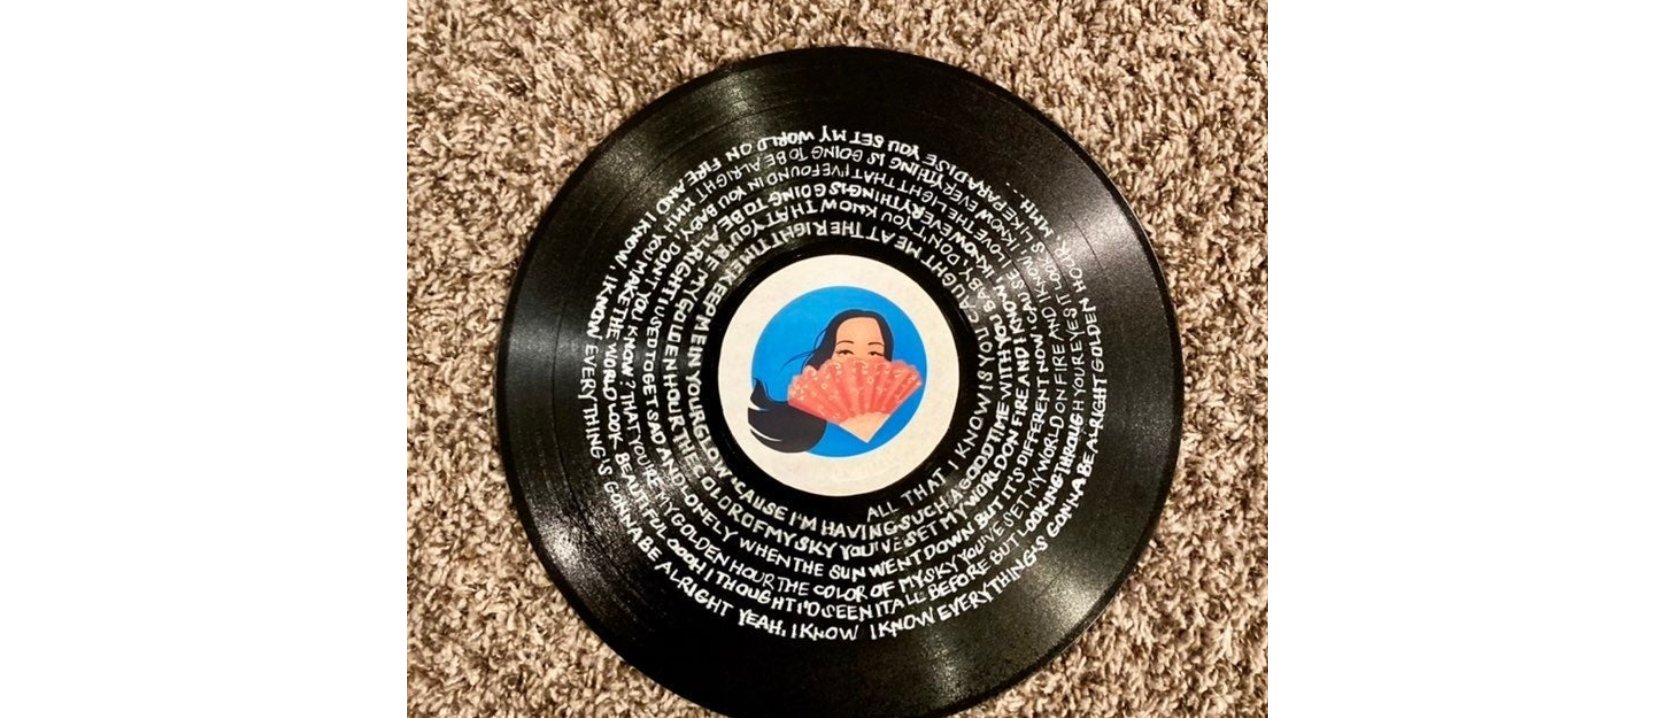 Personalized Vinyl Record Song With Lyrics on Acrylic With 